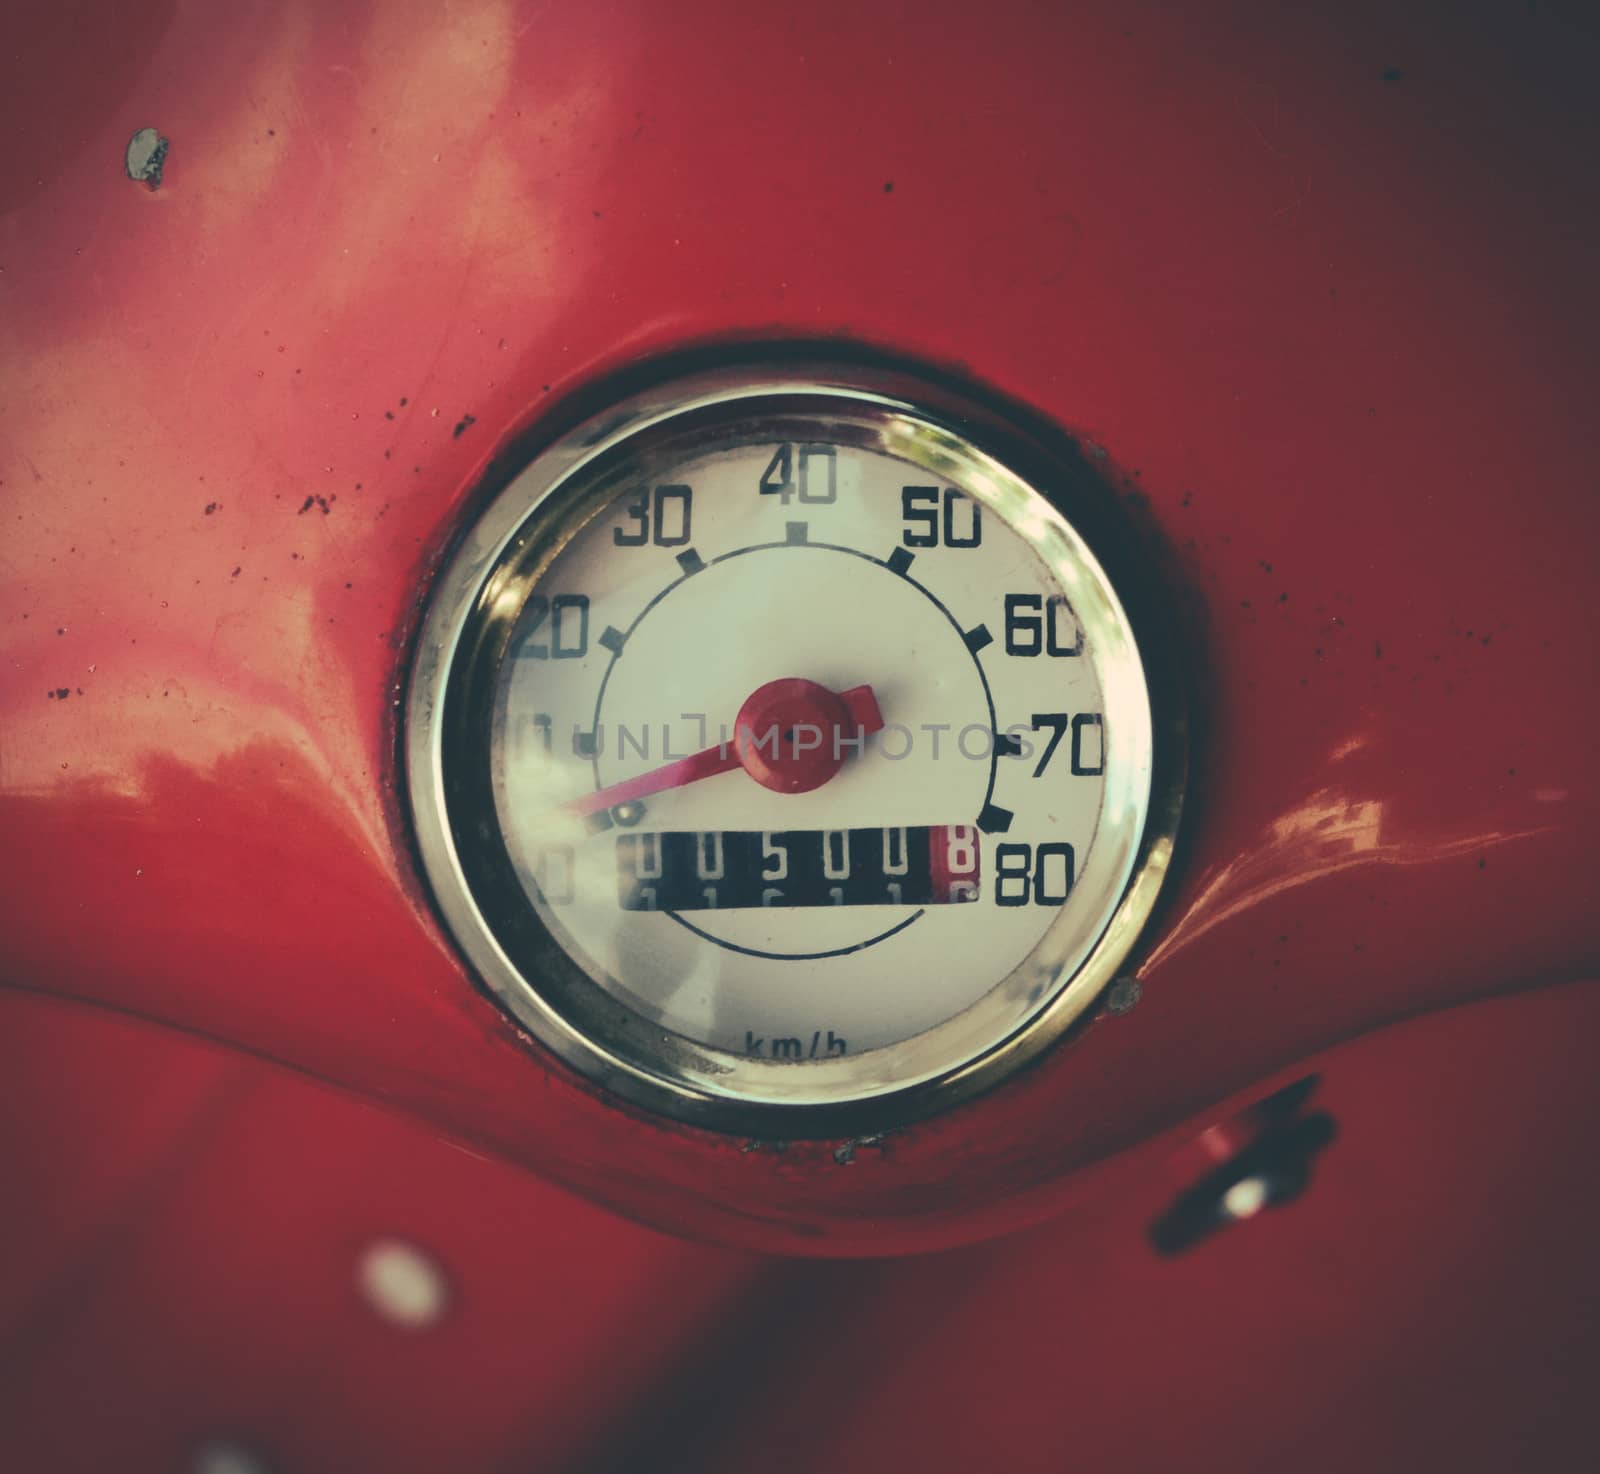 Retro Styled Image Of A Speedometer On A Vintage Italian Scooter